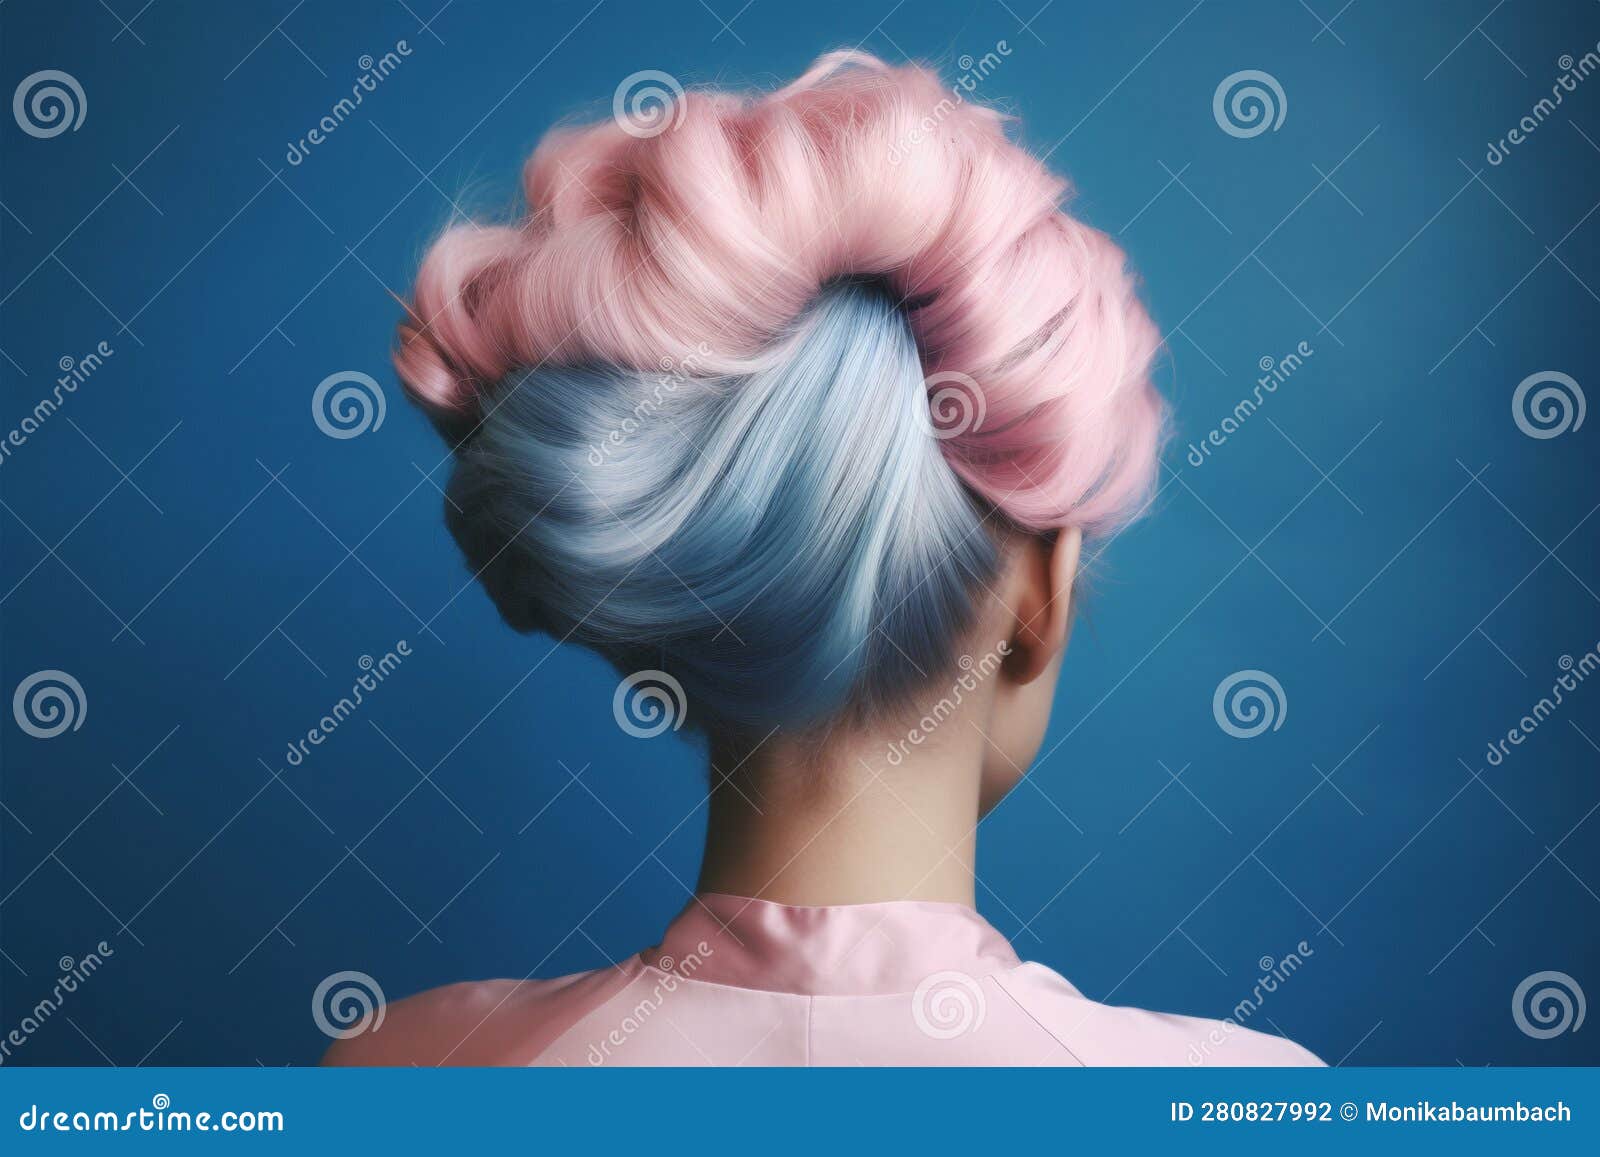 1. Pink and Blue Hair Curls: 10 Ideas for Your Next Hair Color - wide 1